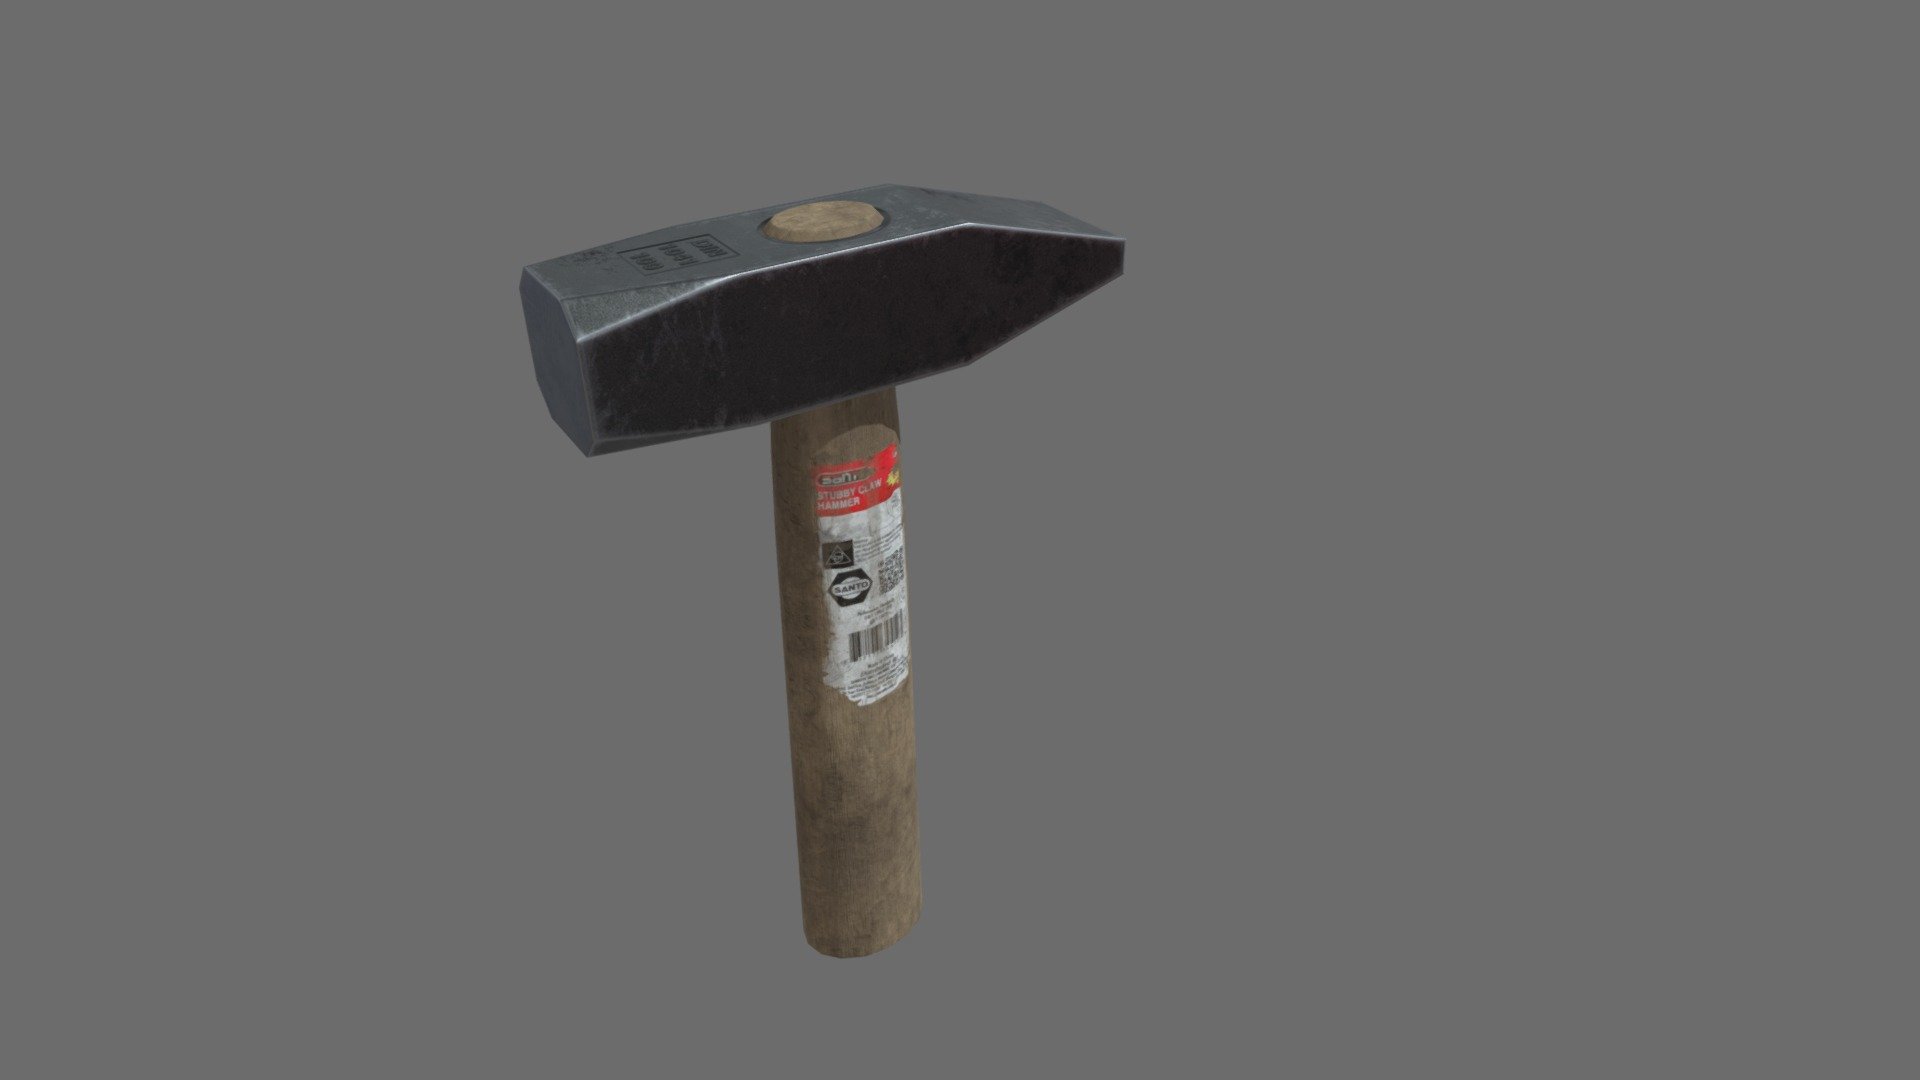 3D model of a standard hammer with a short handle.

Texture 2k - PBR Metallic Roughness.

Triangles: 228

Vertices: 134
 - Standard hammer - Download Free 3D model by Silent (@EvgenSilent) 3d model